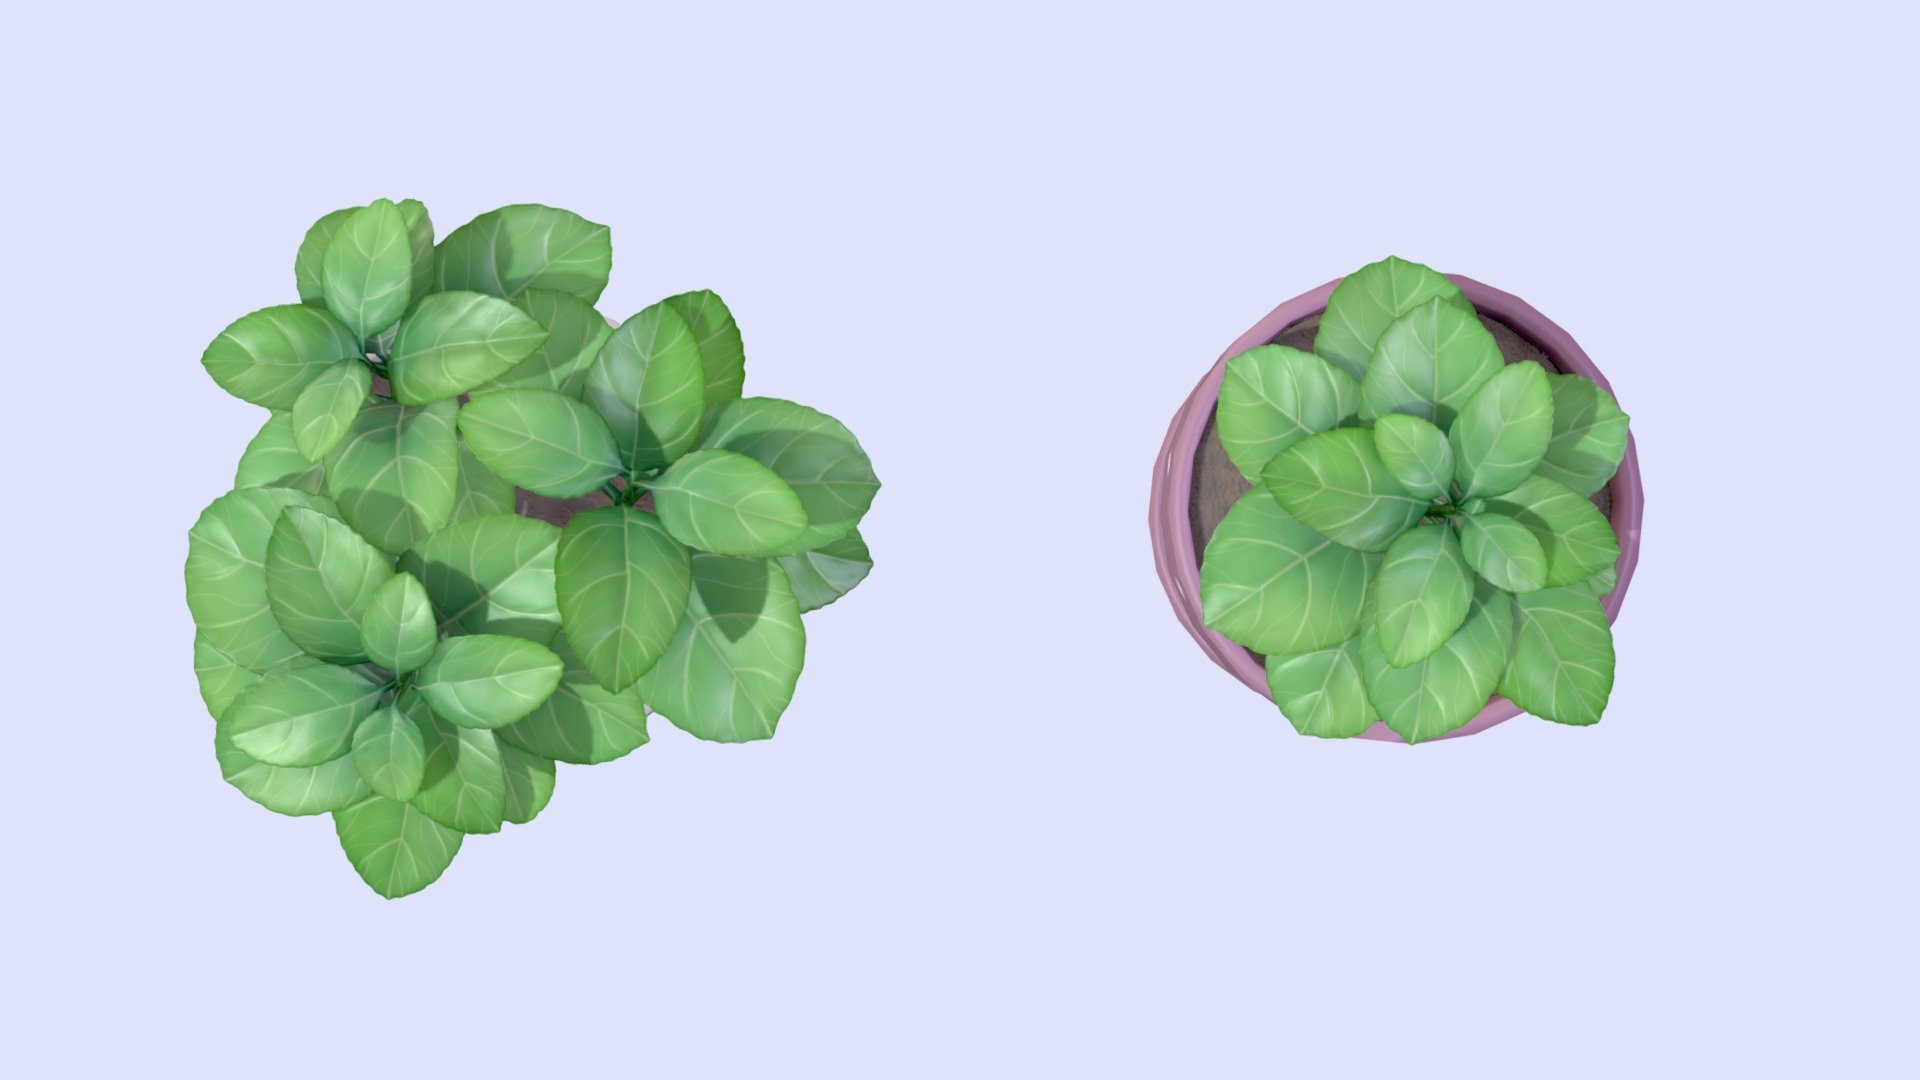 Low poly basil plants for my kitchen environment project.

Modeled in Blender &amp; Zbrush, textured in Substance 3d Painter 3d model